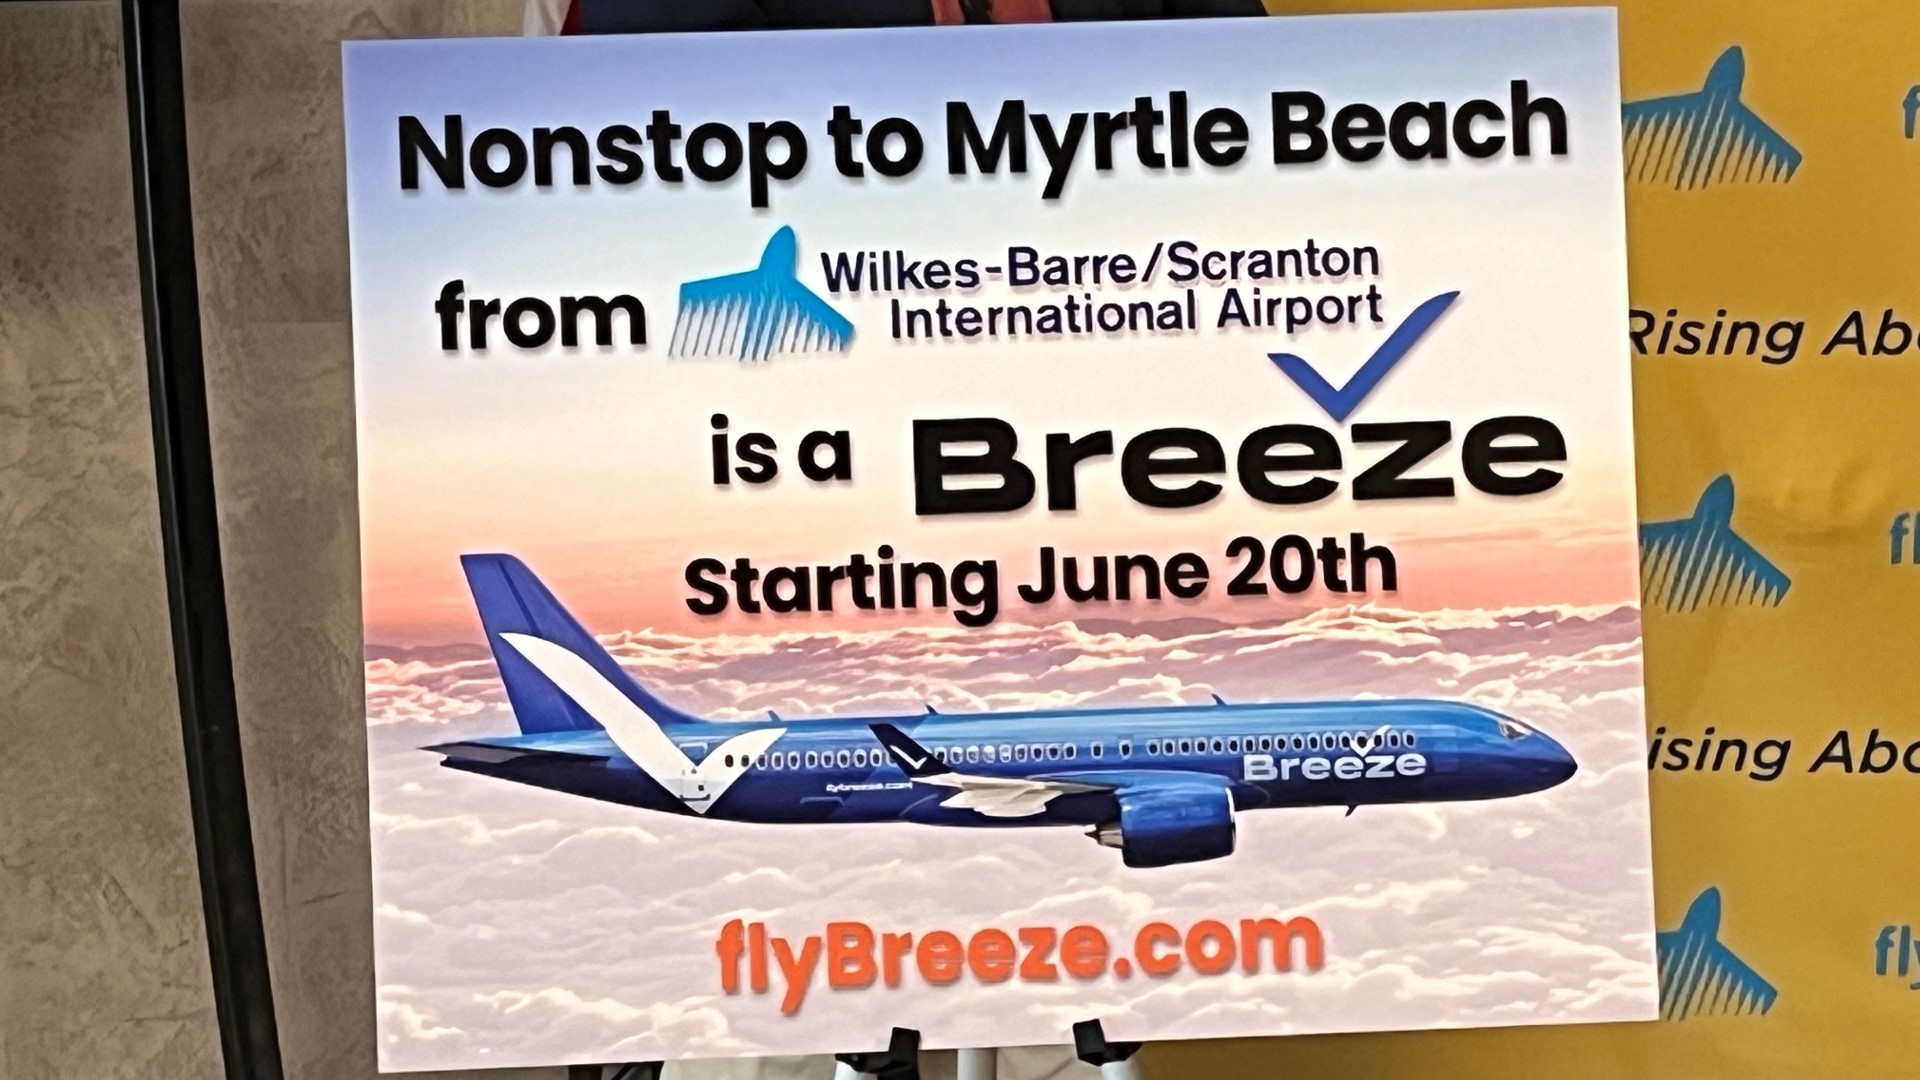 The Wilkes-Barre/Scranton International Airport and Breeze Airways announced plans for fights to Myrtle Beach beginning this summer.